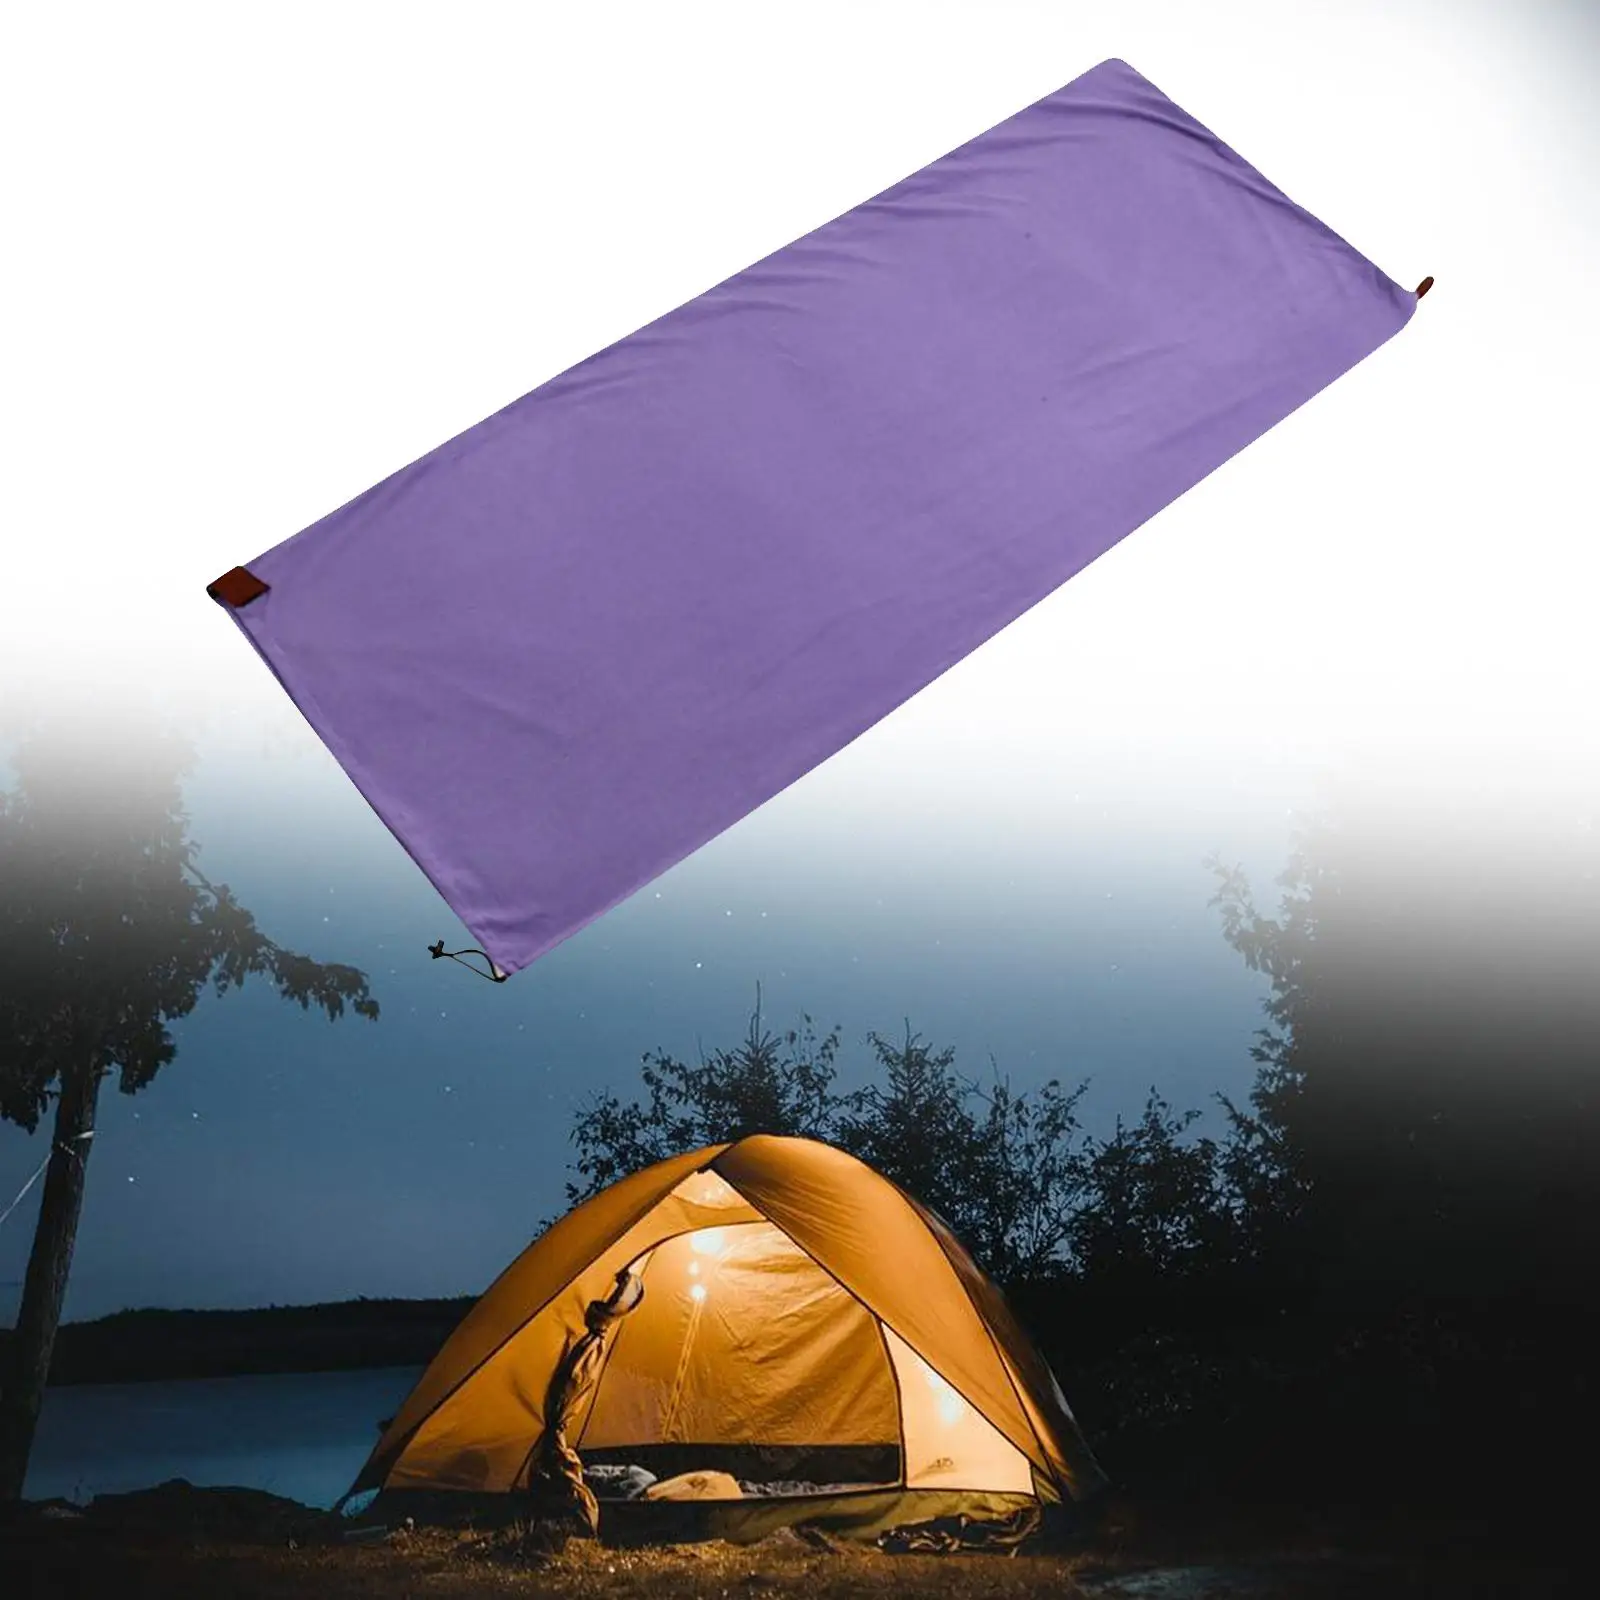 Sleeping Bag Liner Sleep Sheet Backpacking Blanket Versatile for Warm or Cold Weather Accessory Full Sized Zipper 180cm Length